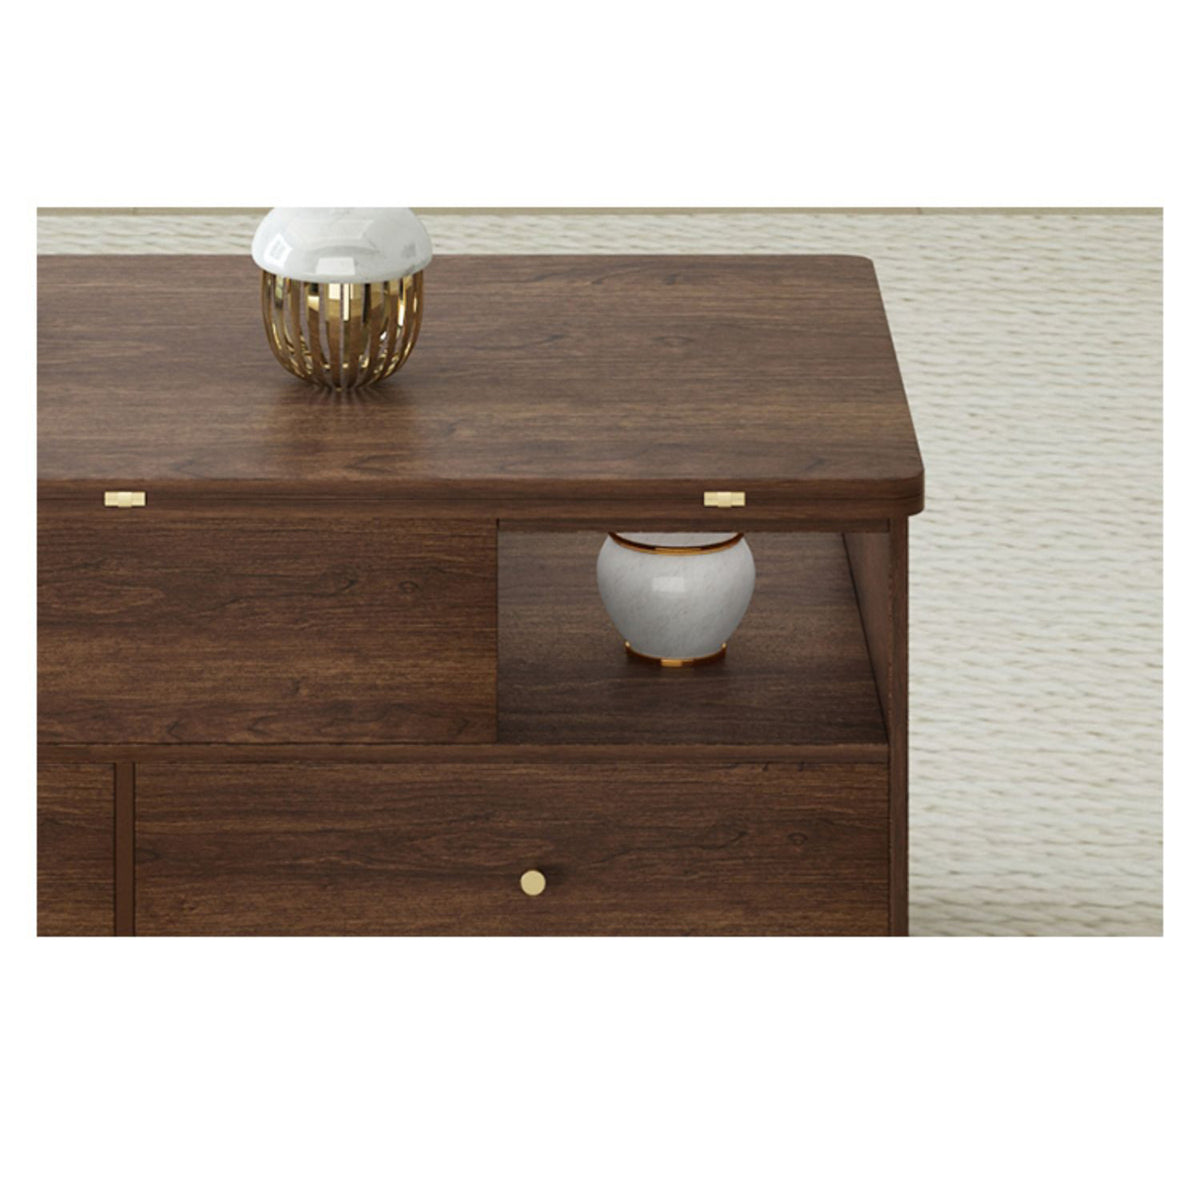 Elegant Solid Wood Tea Table with Ceramic Top - Brown, White & Black hx-1569